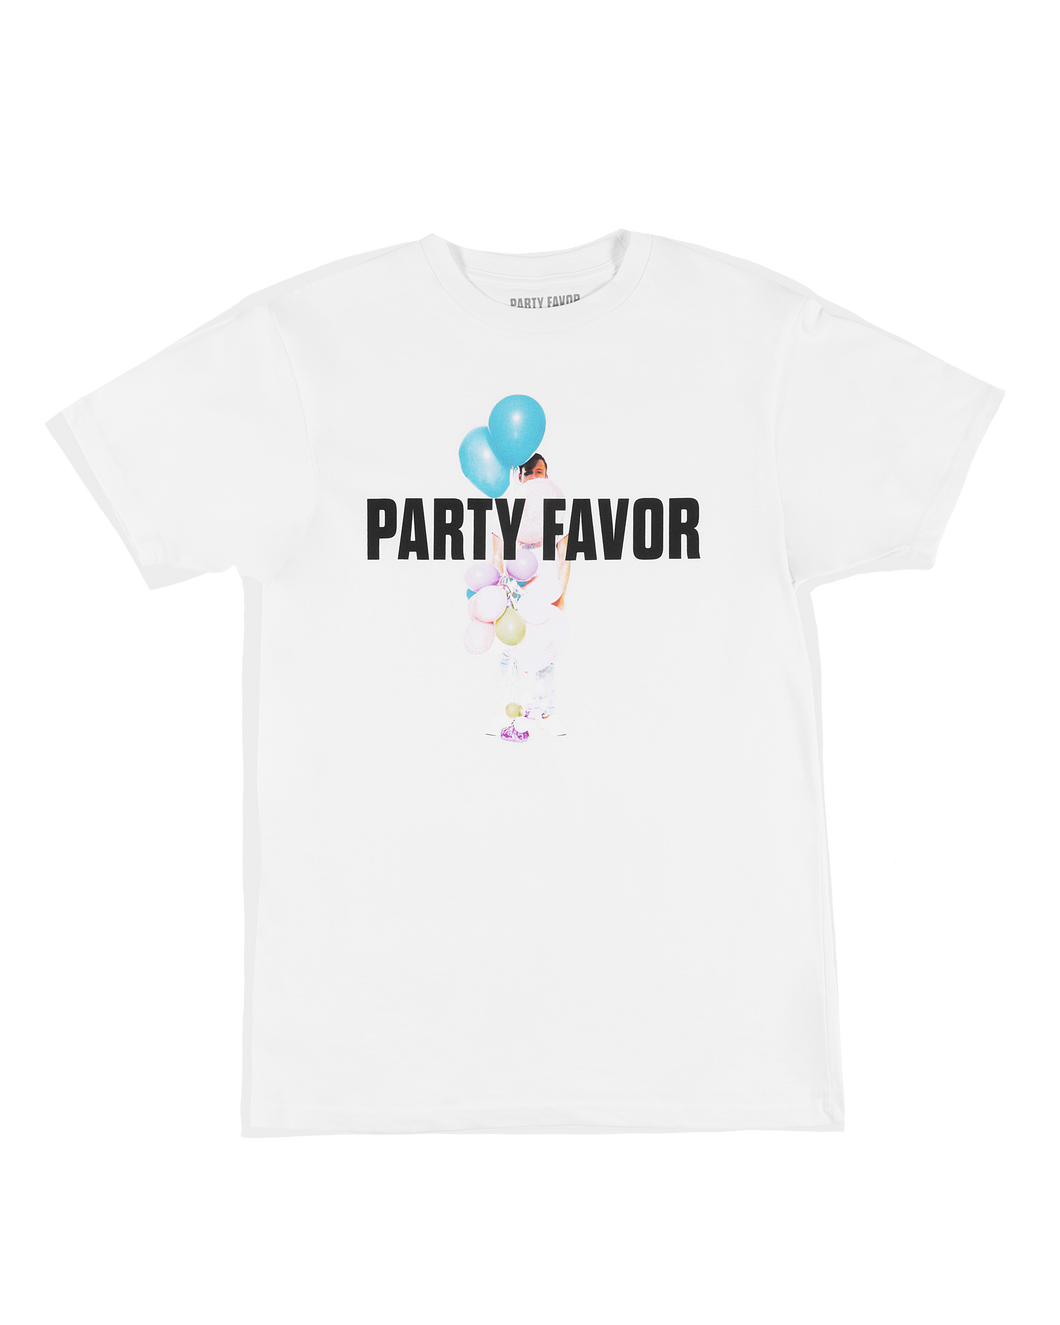 Party Favor w/ Balloons T-Shirt